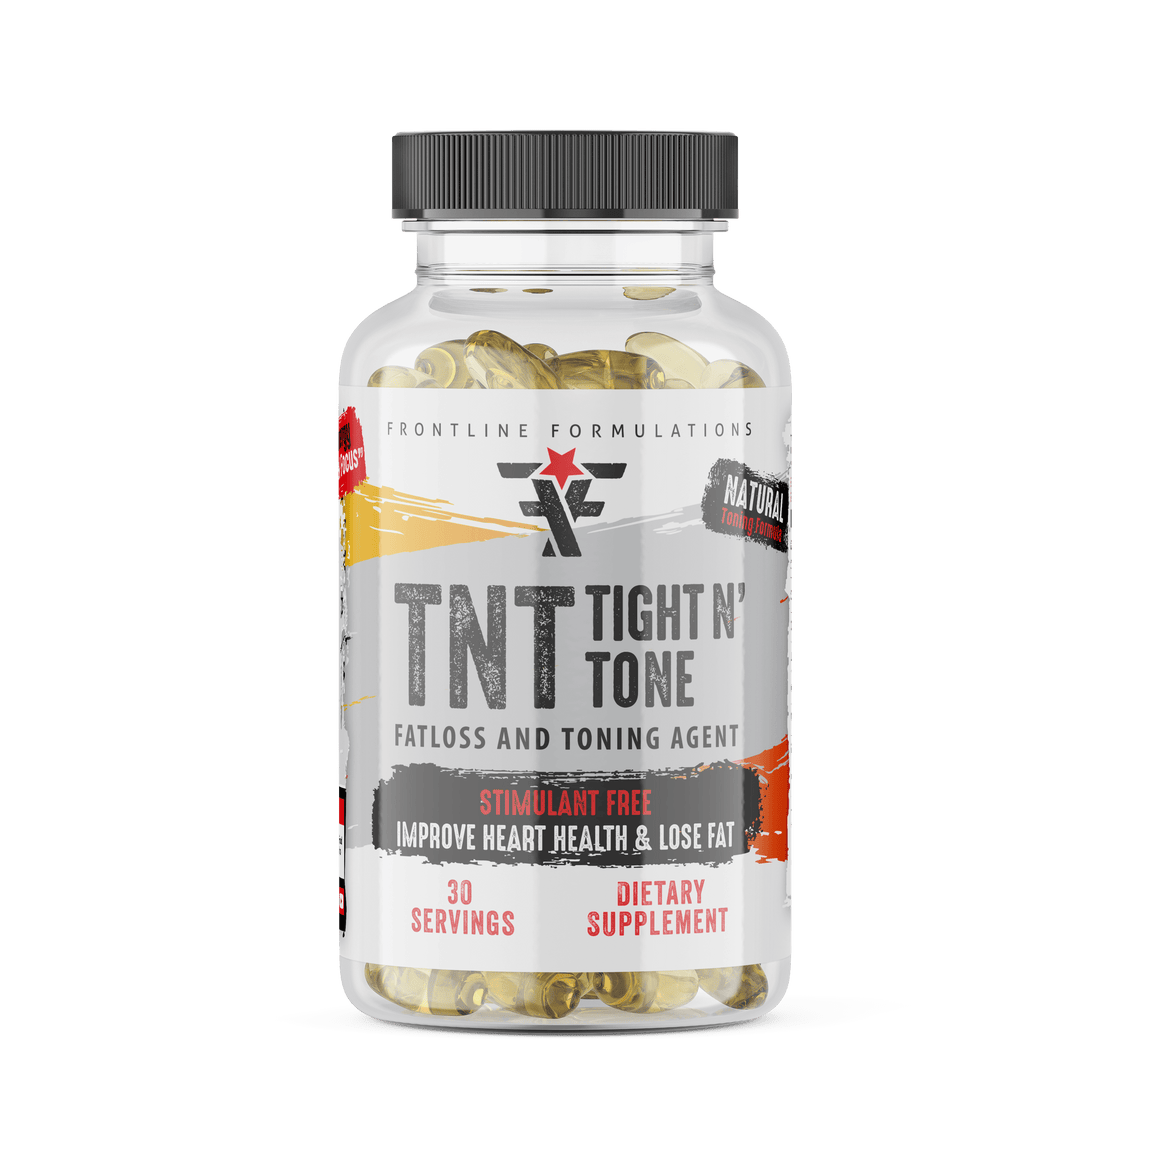 Frontline Formulations Tight-N-Tone